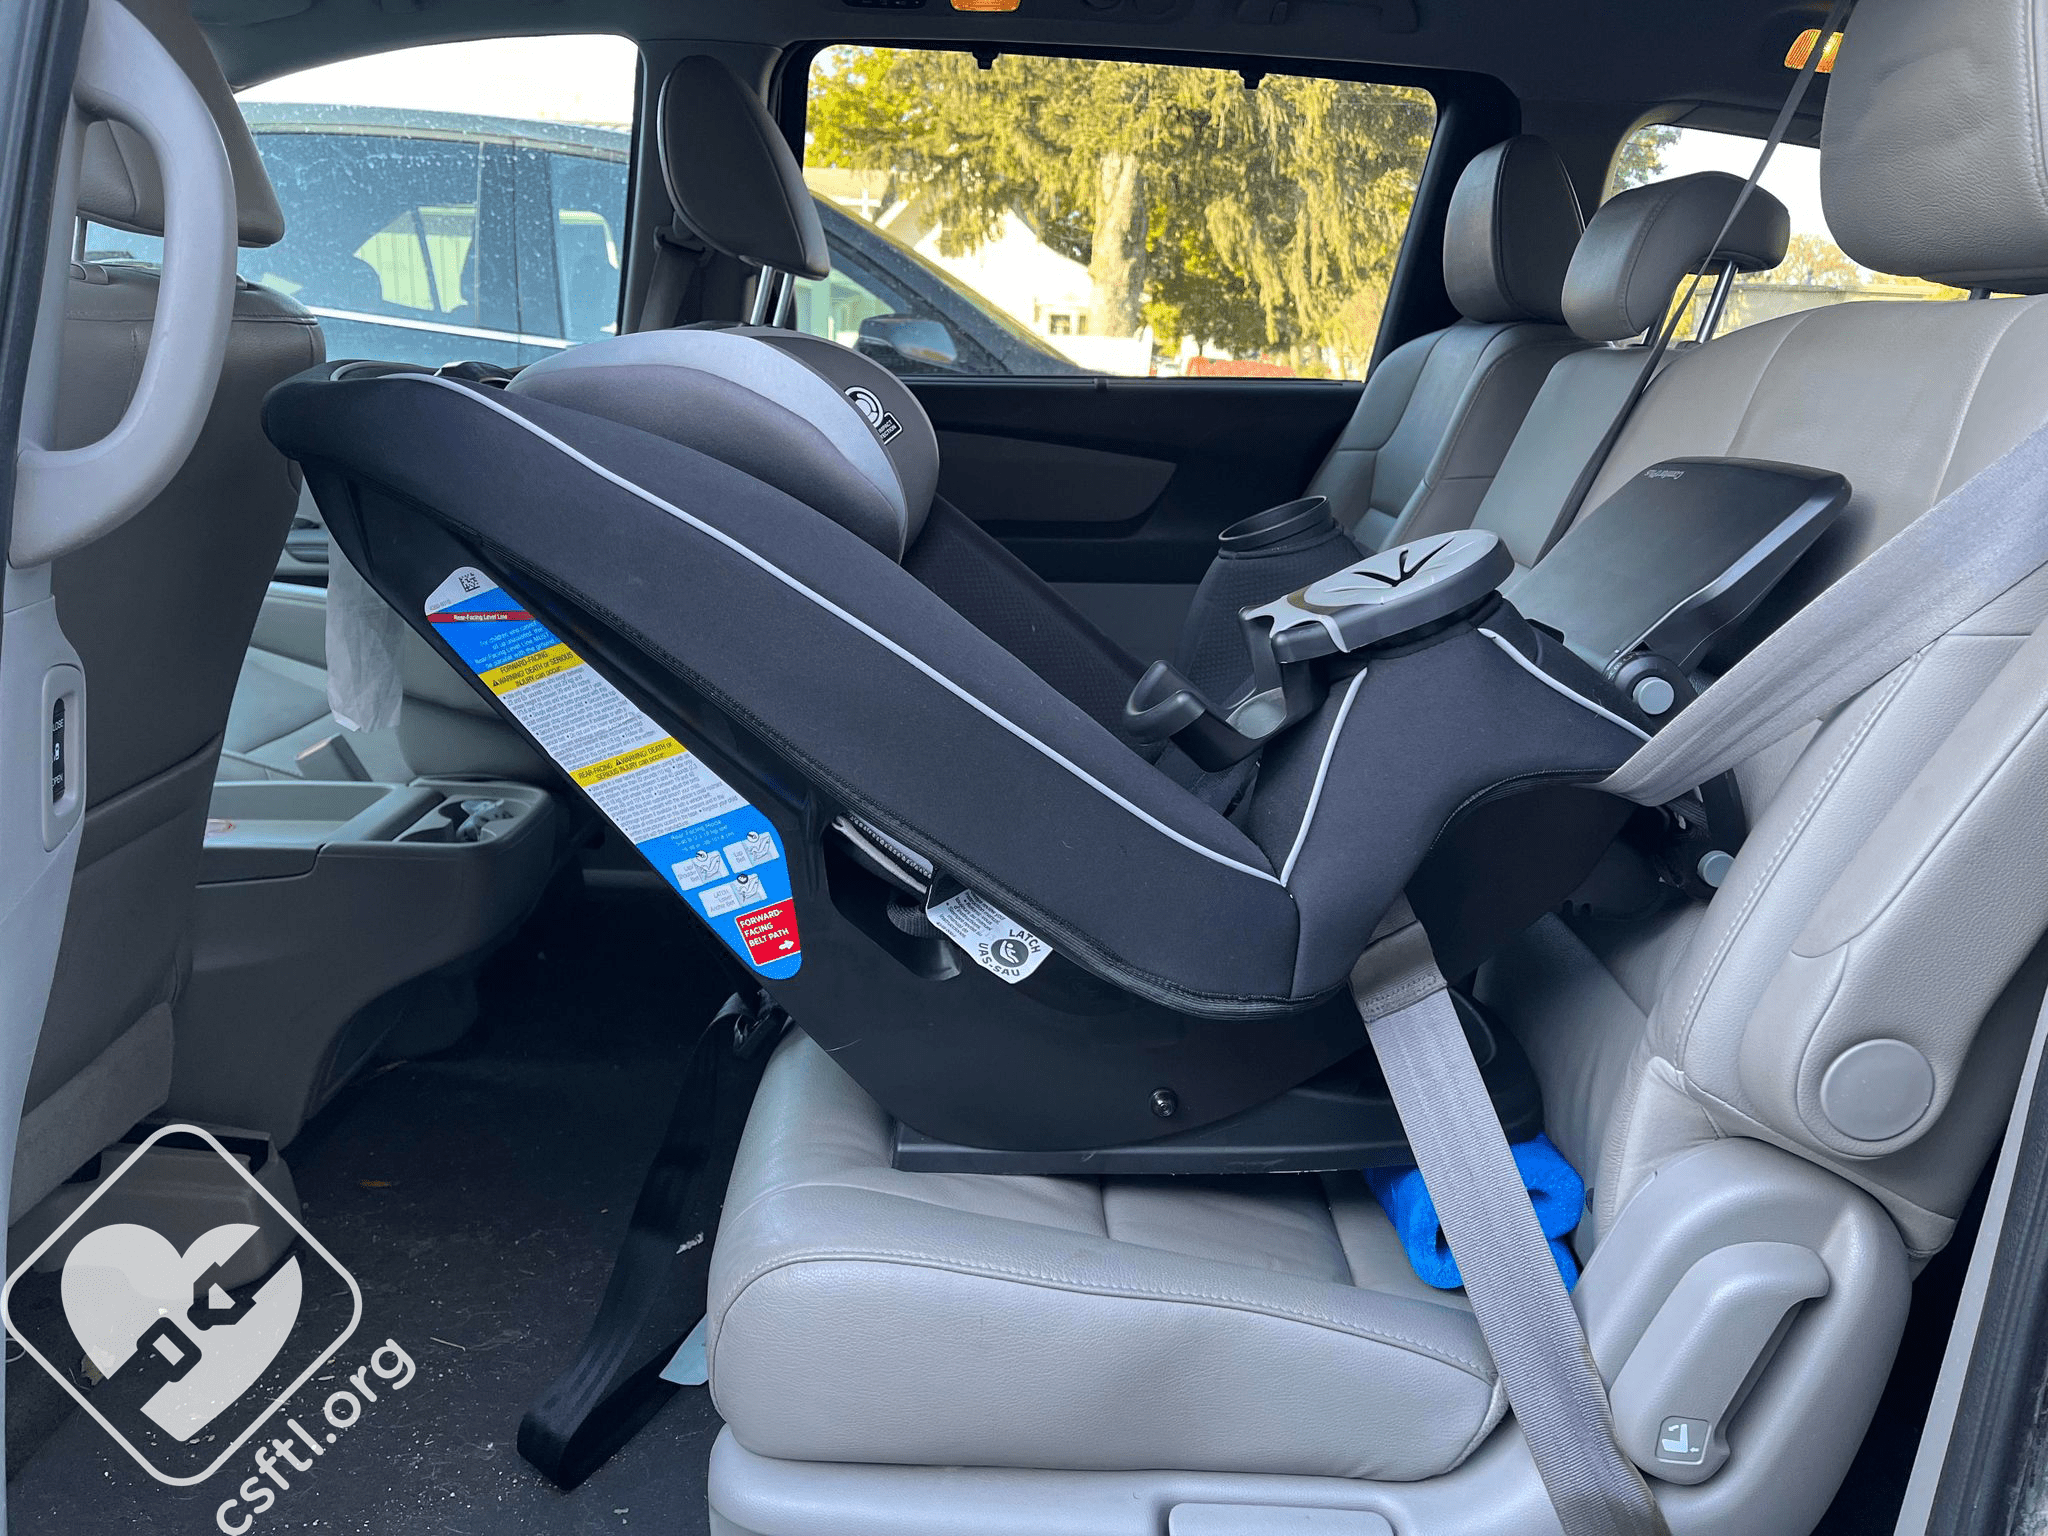 How to Put Safety First Grow And Go Car Seat Back Together After Washing: A Step-by-Step Guide